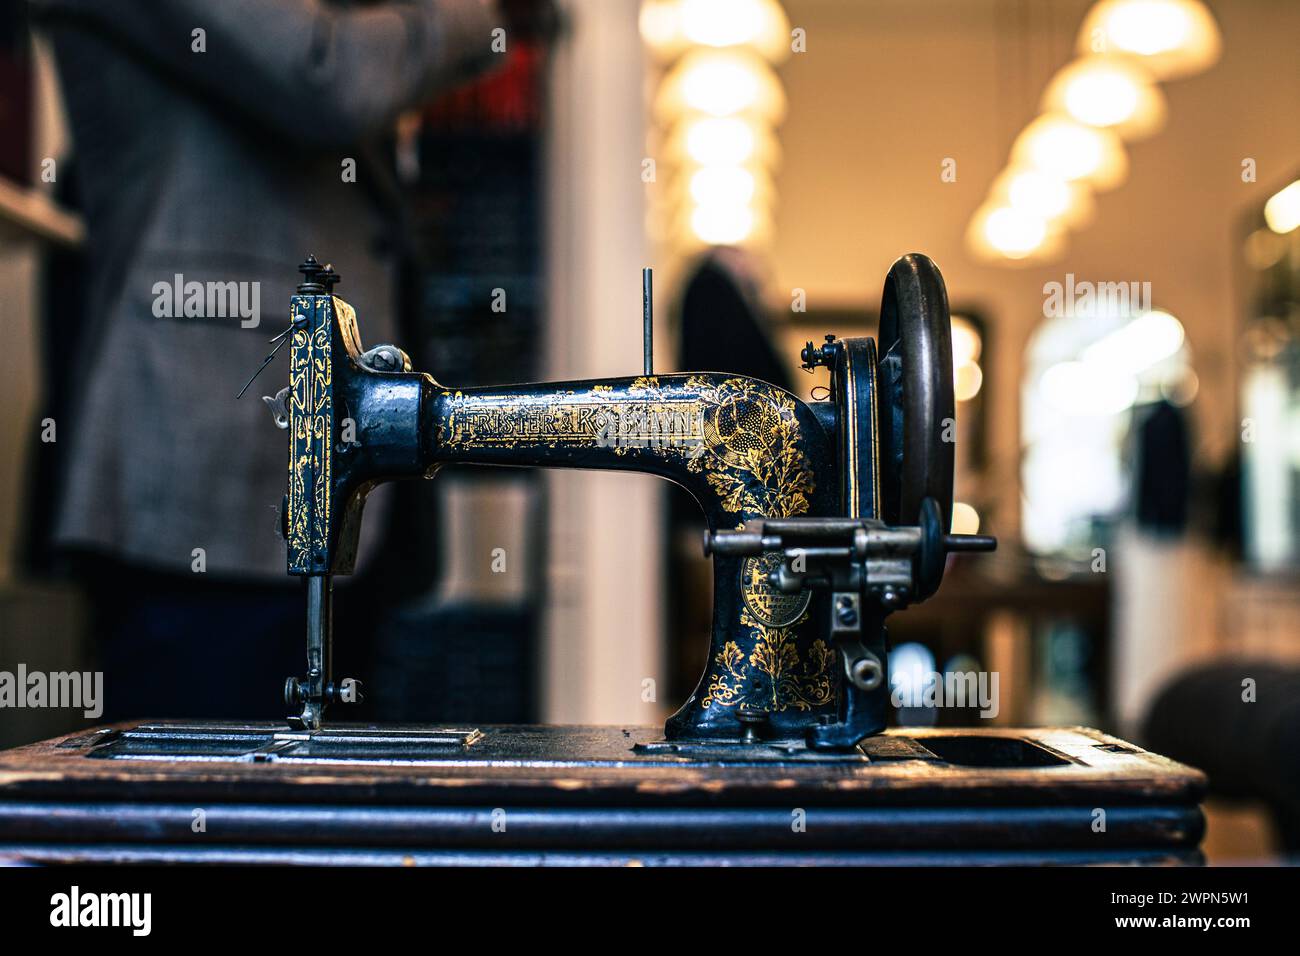 Vintage sewing machine on wooden tabel front view Stock Photo